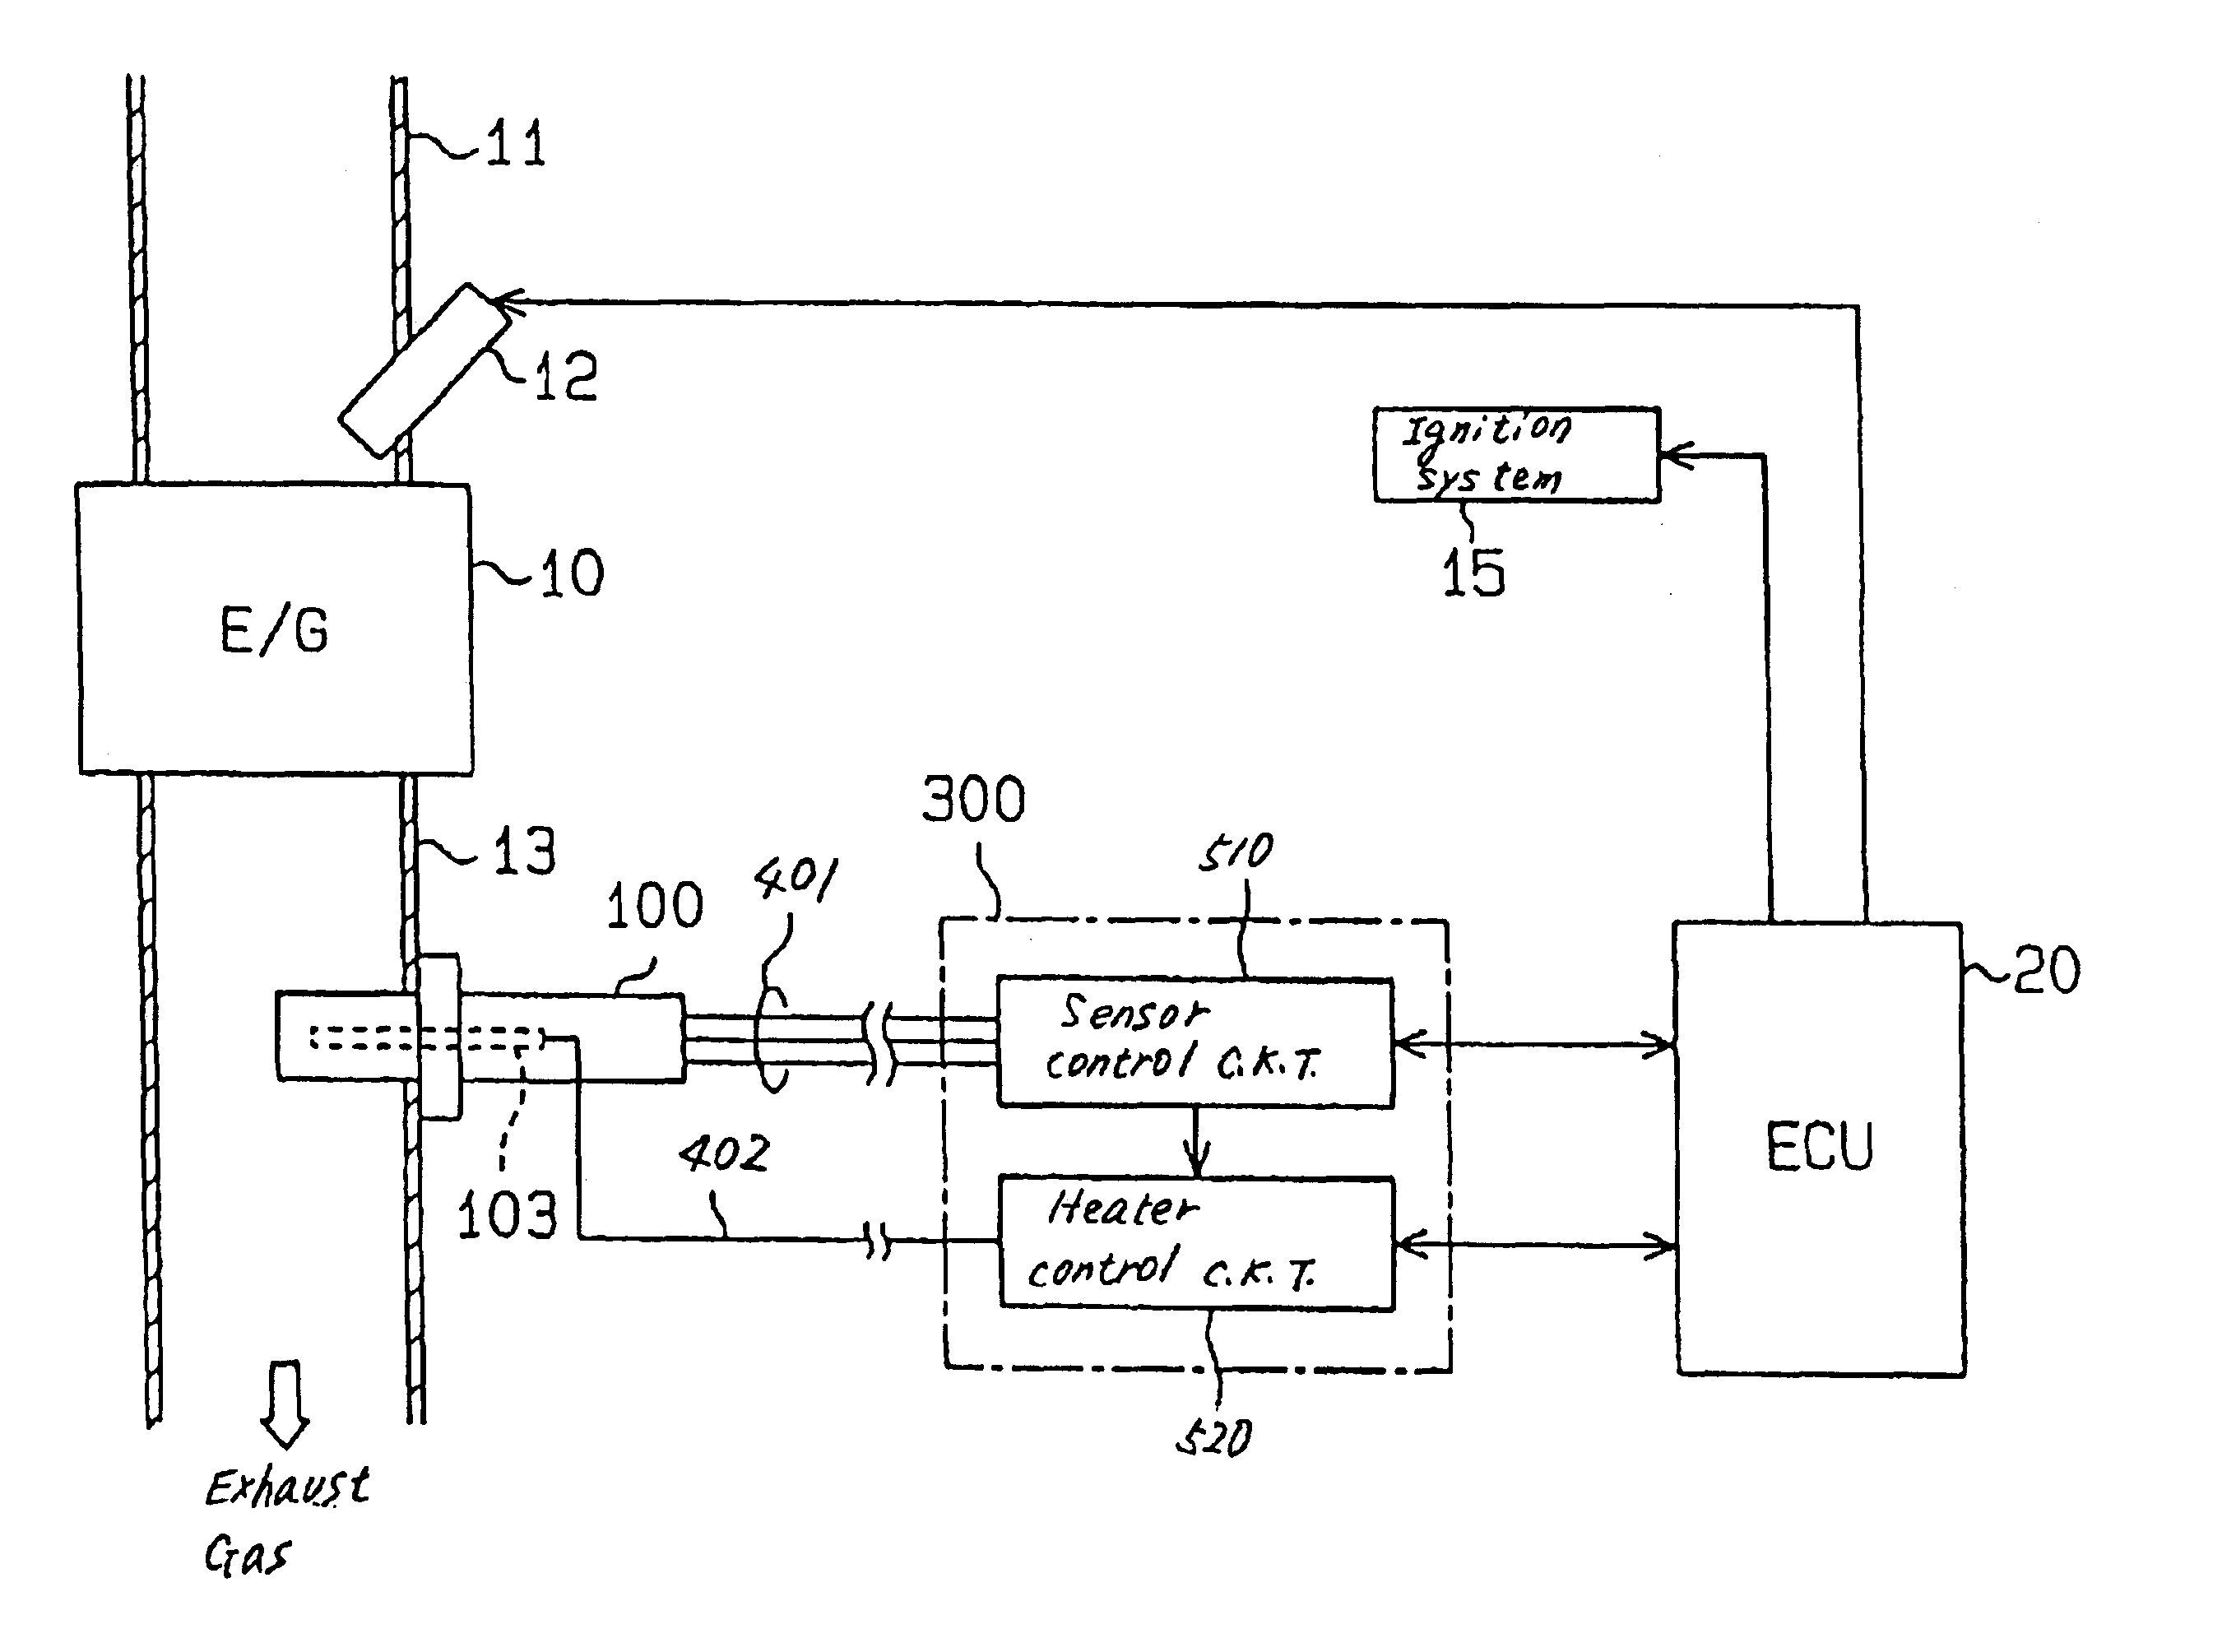 Gas concentration measuring apparatus designed to minimize error component contained in output